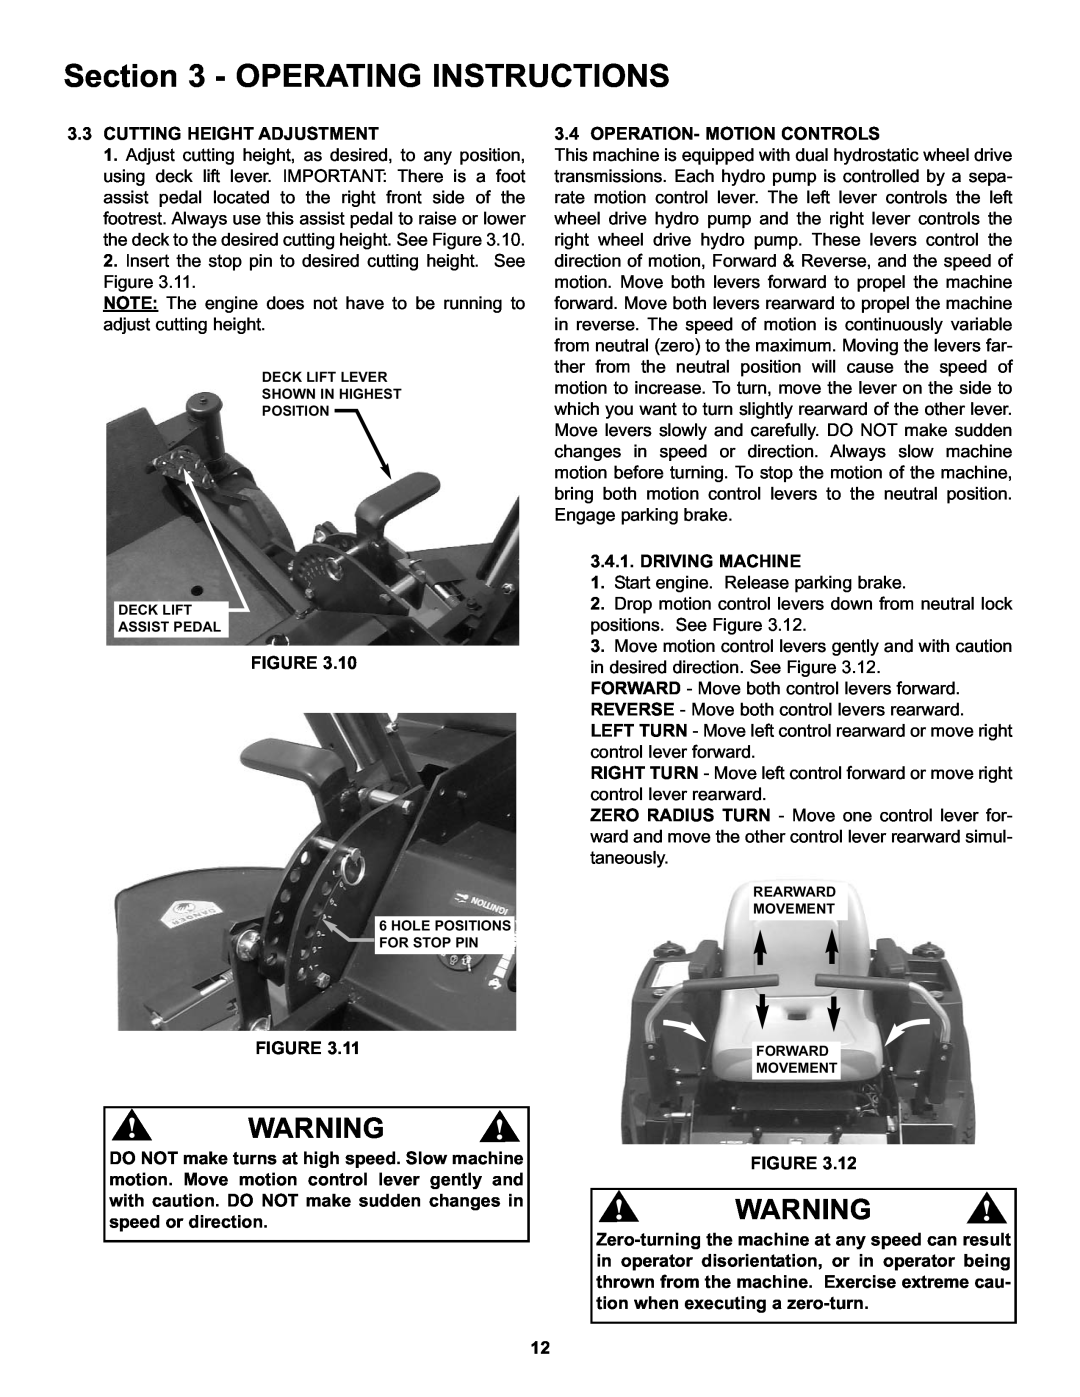 Snapper HZT21481BV Operating Instructions, 3.3CUTTING HEIGHT ADJUSTMENT, Operation- Motion Controls, Driving Machine 